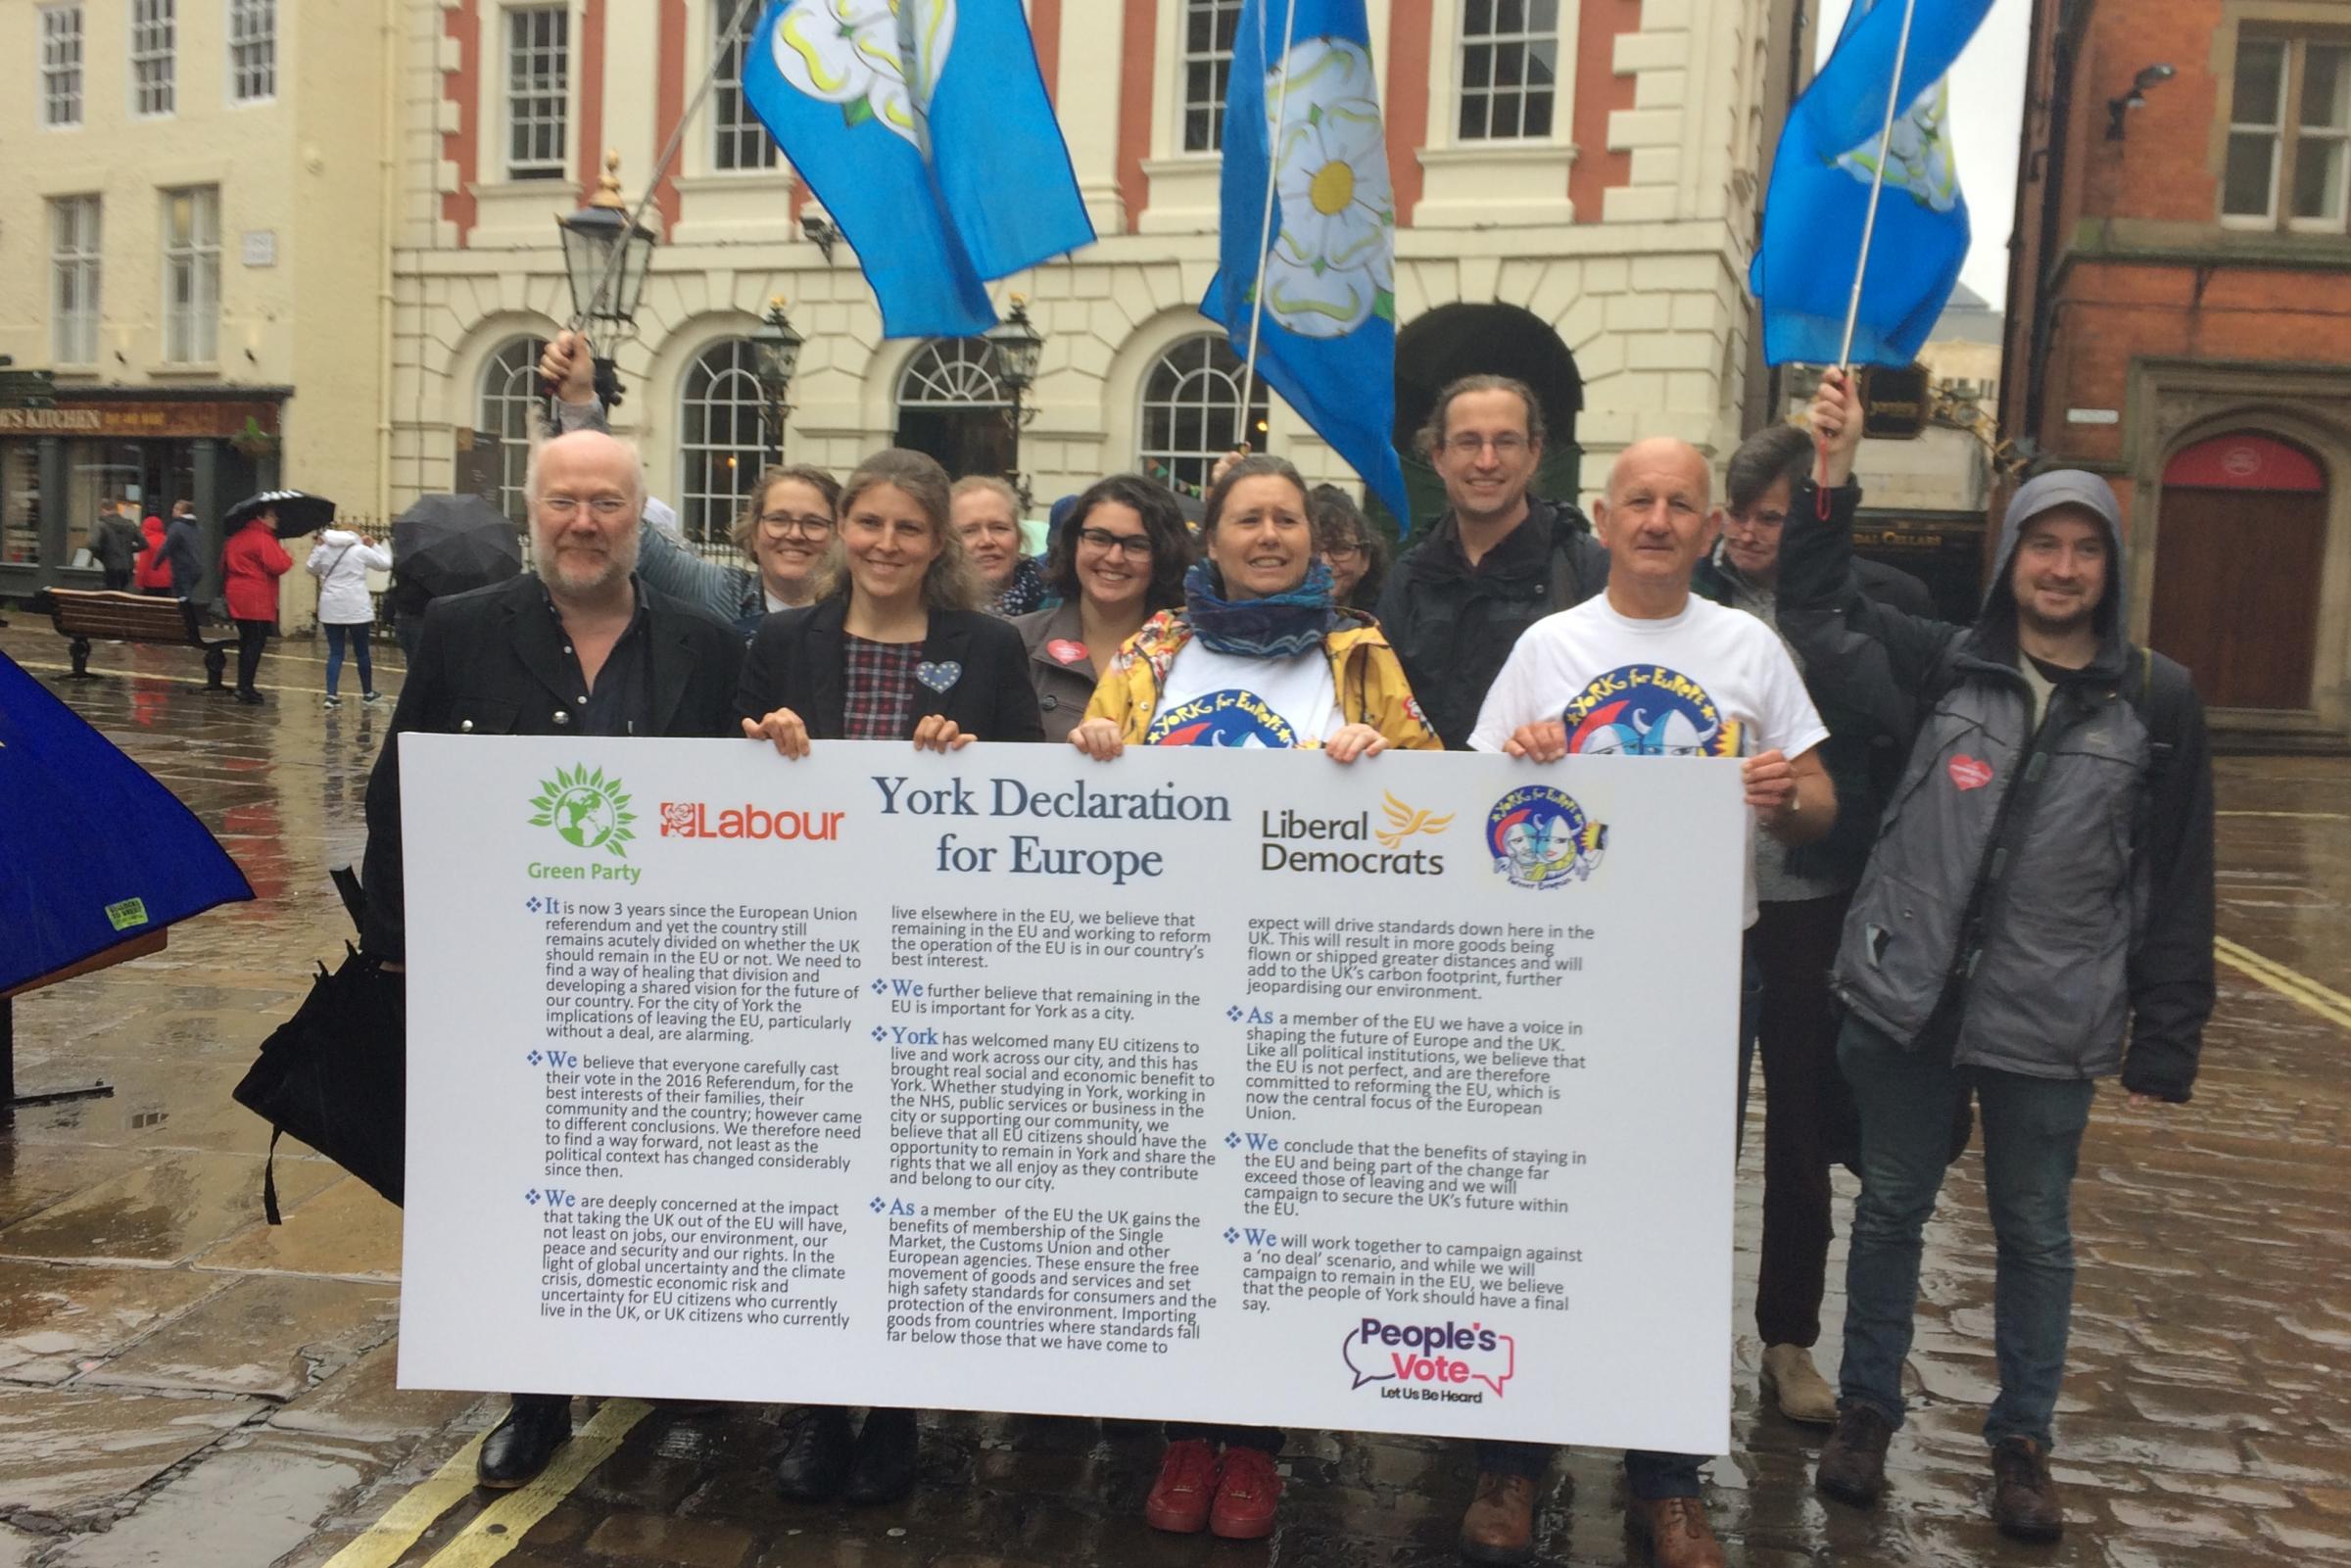 Campaigners from York heading to London for Final Say march